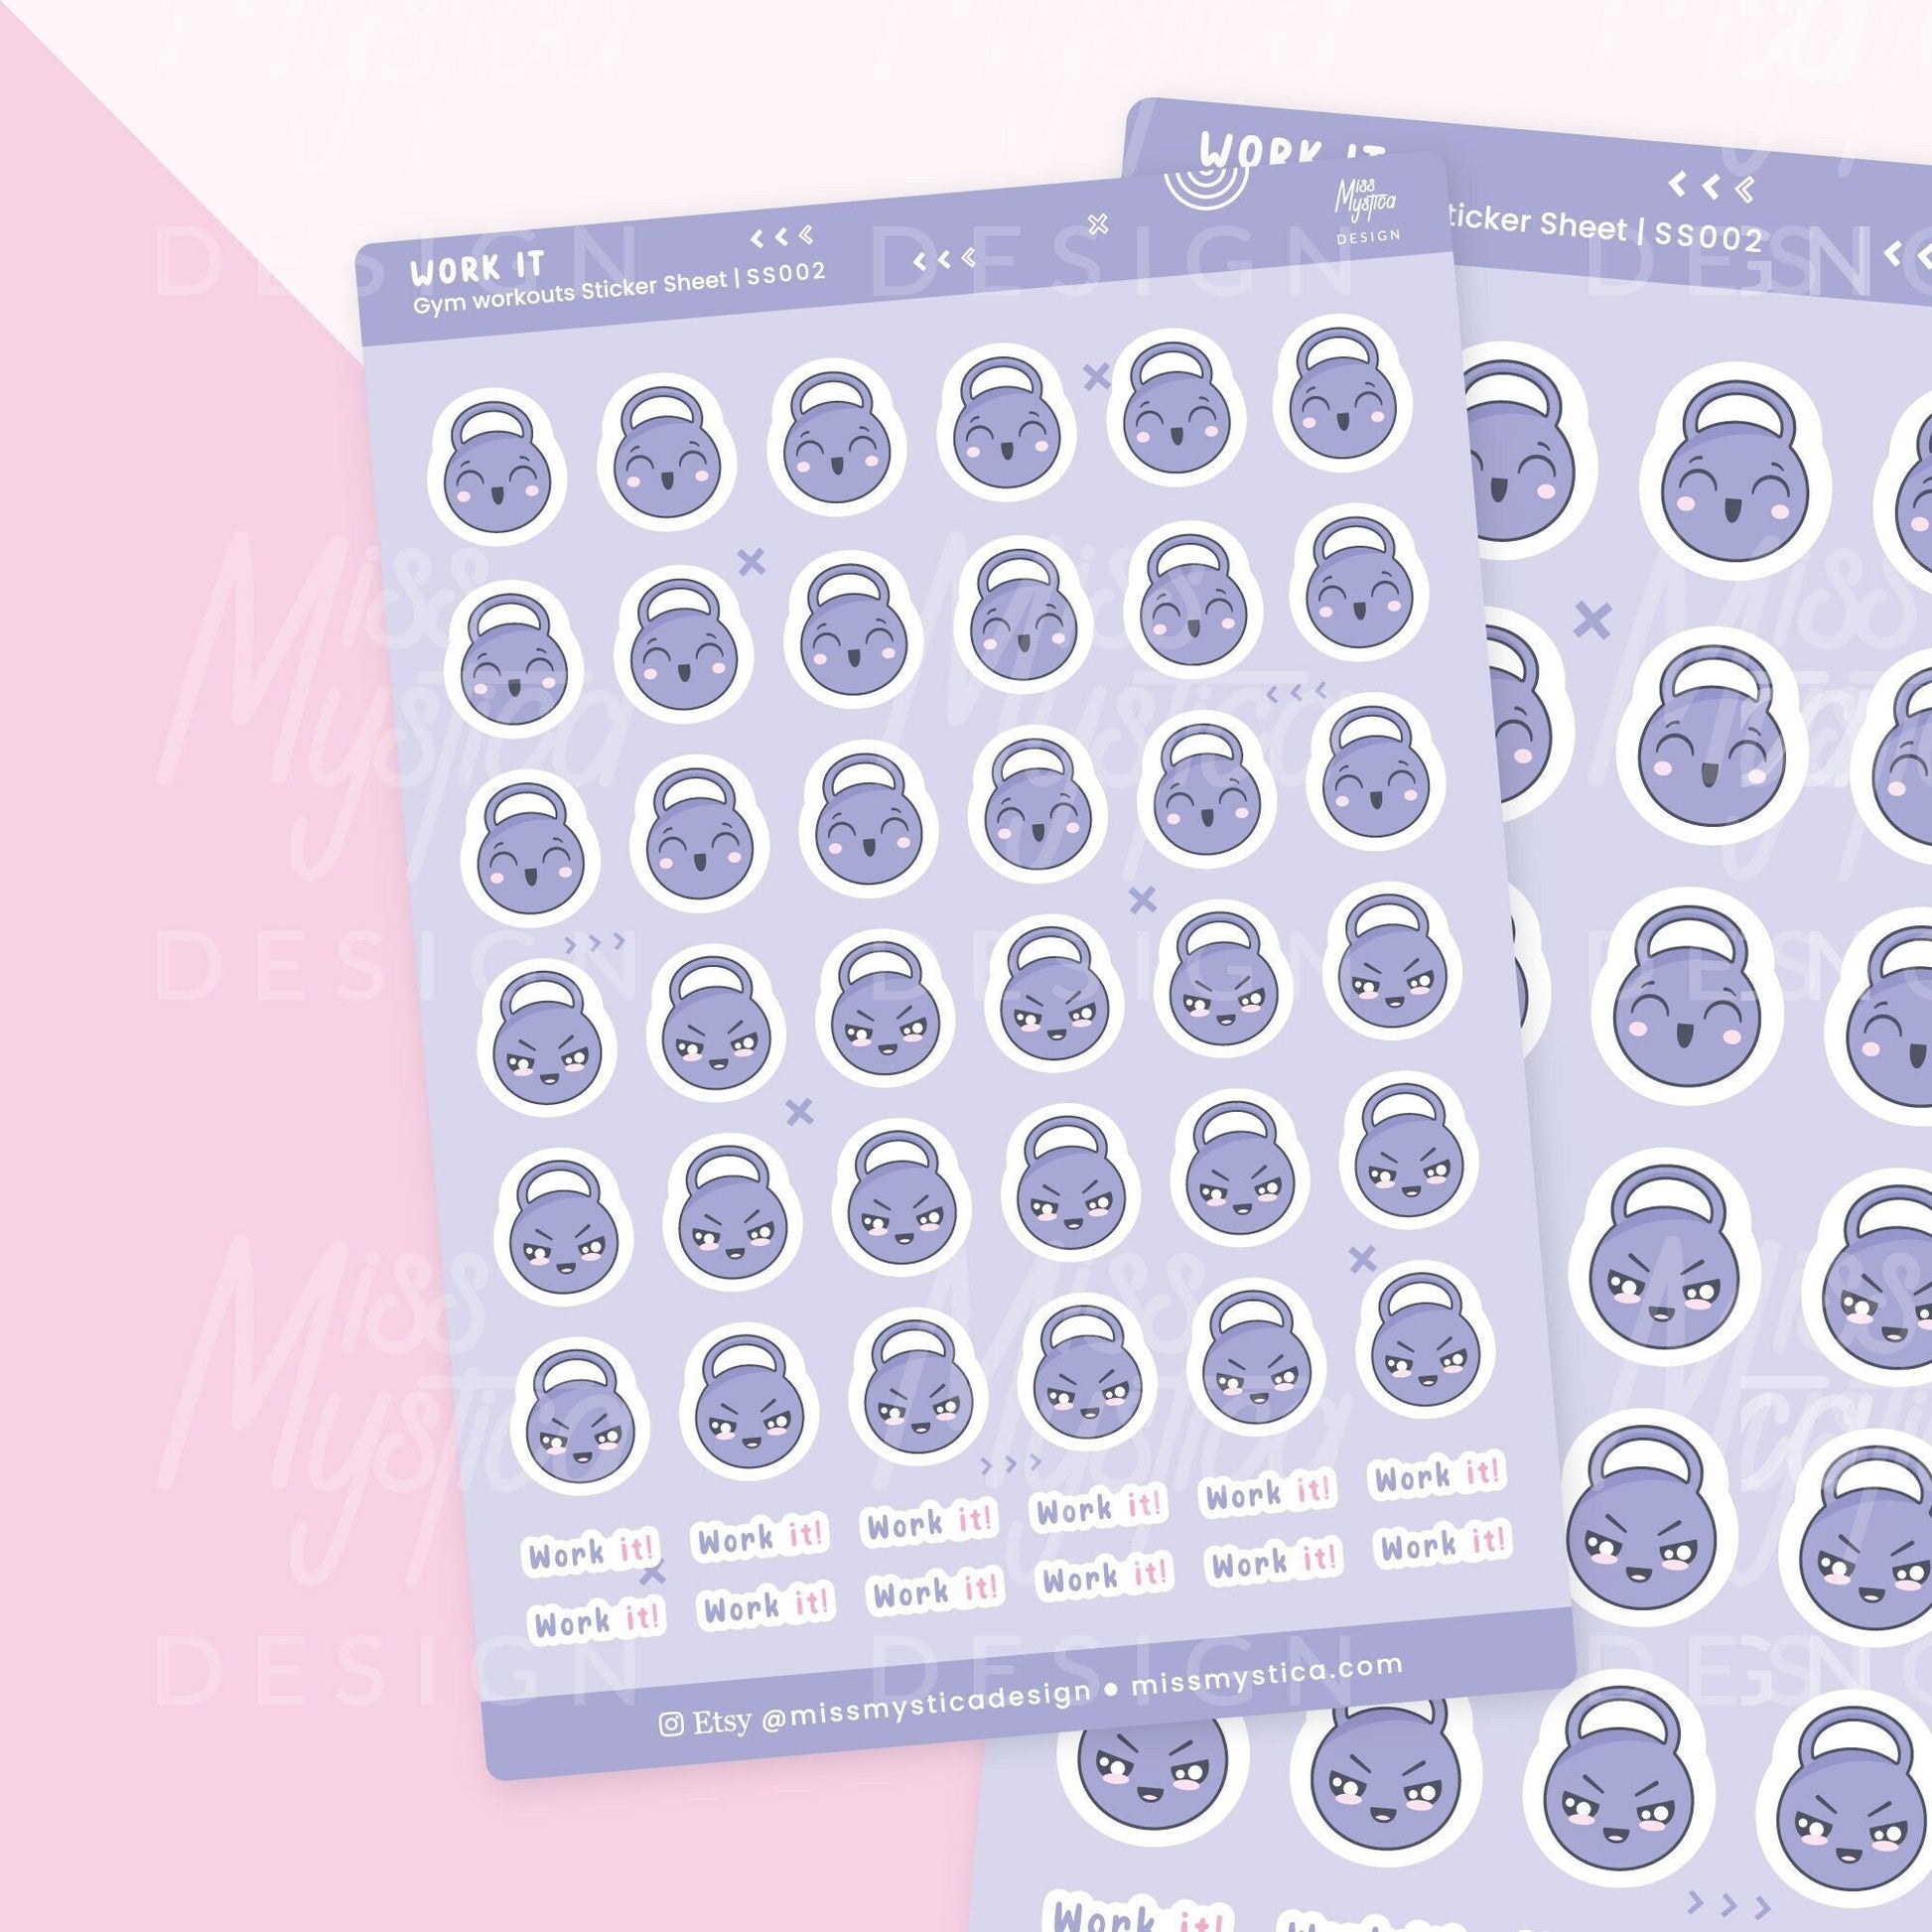 Gym Workouts Sticker Sheet | For Planners Bullet Journal Notebook or Scrapbook